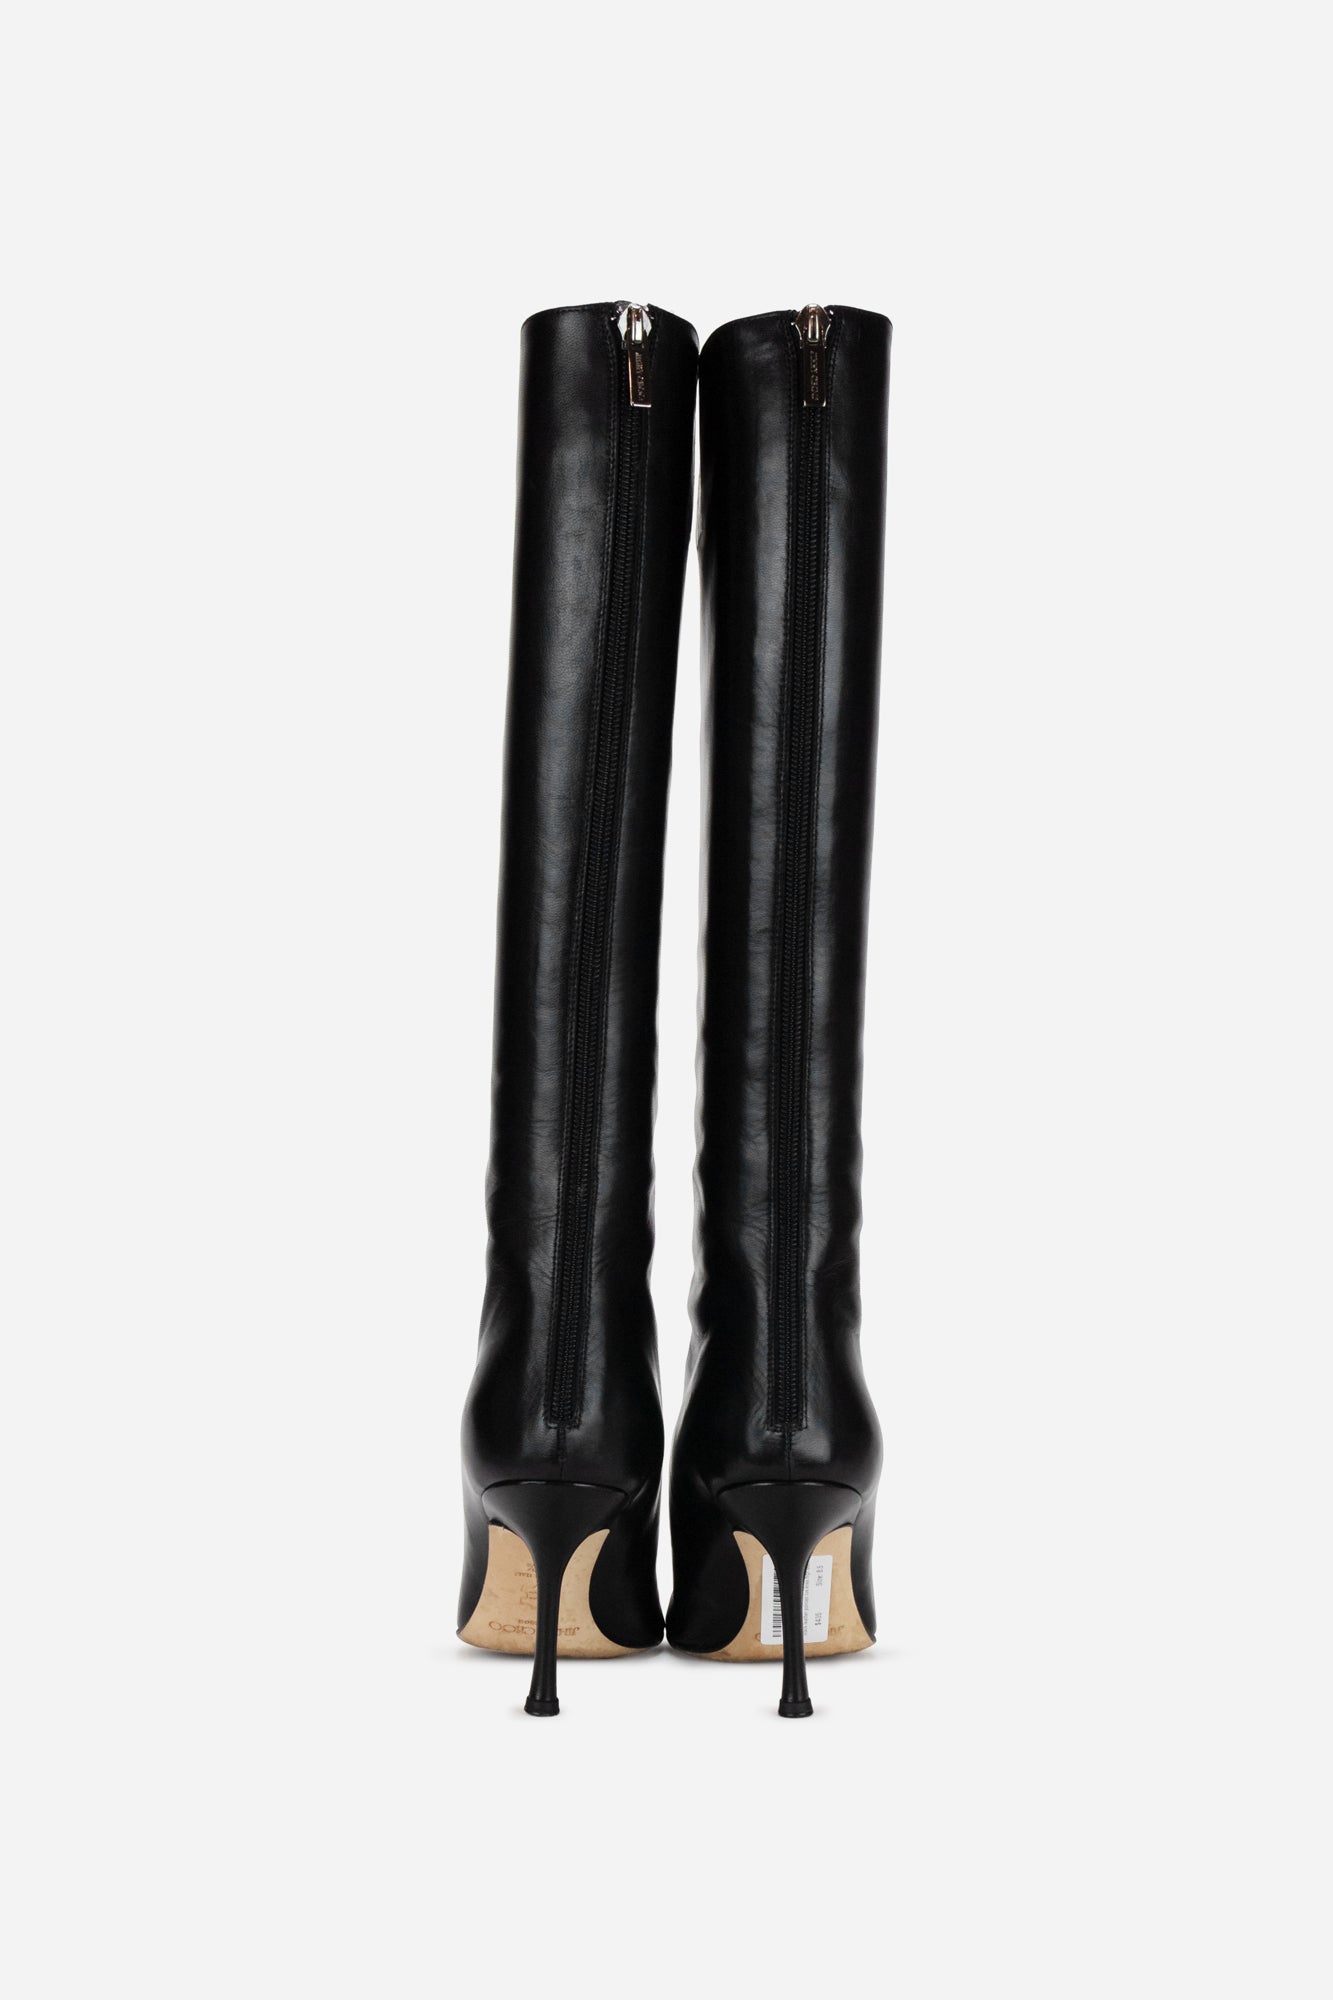 Black leather pointed toe knee high boots